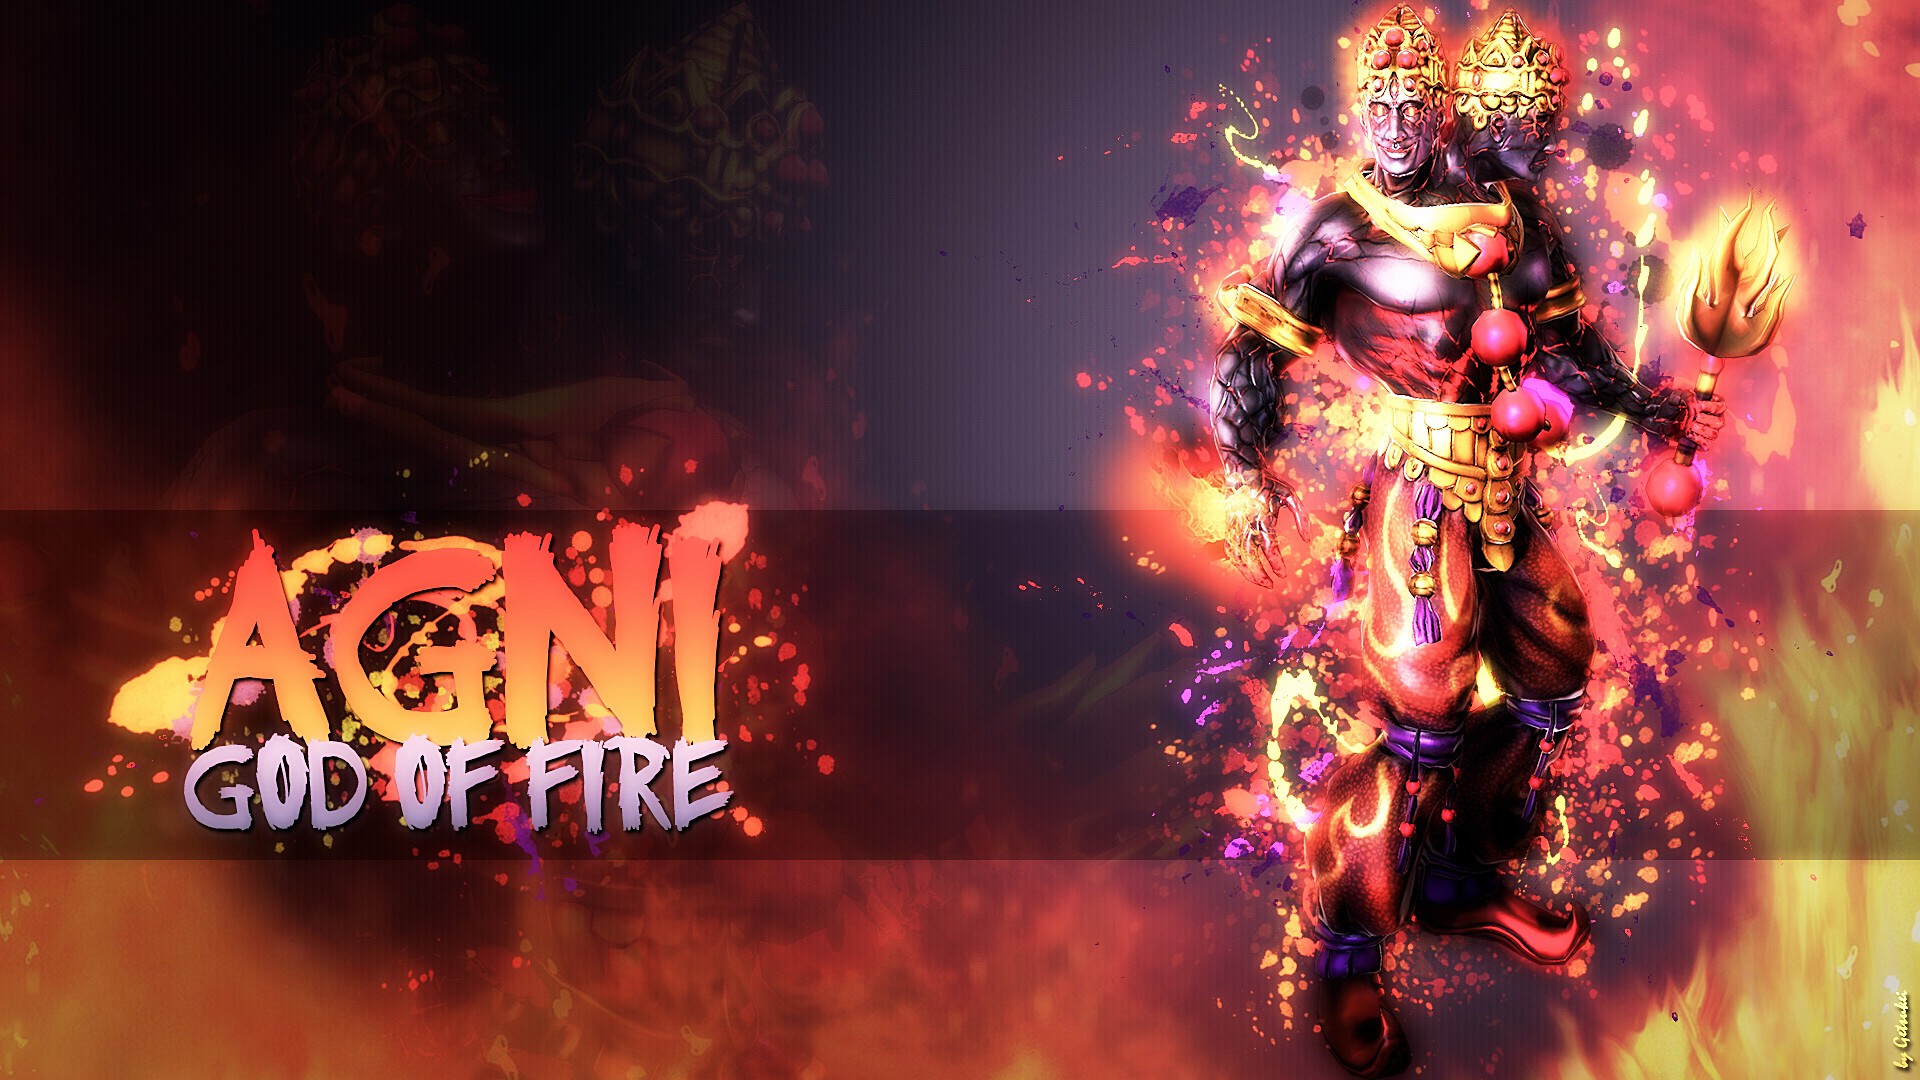 1920x1080 ... God of Fire - Wallpaper HD by Getsukeii